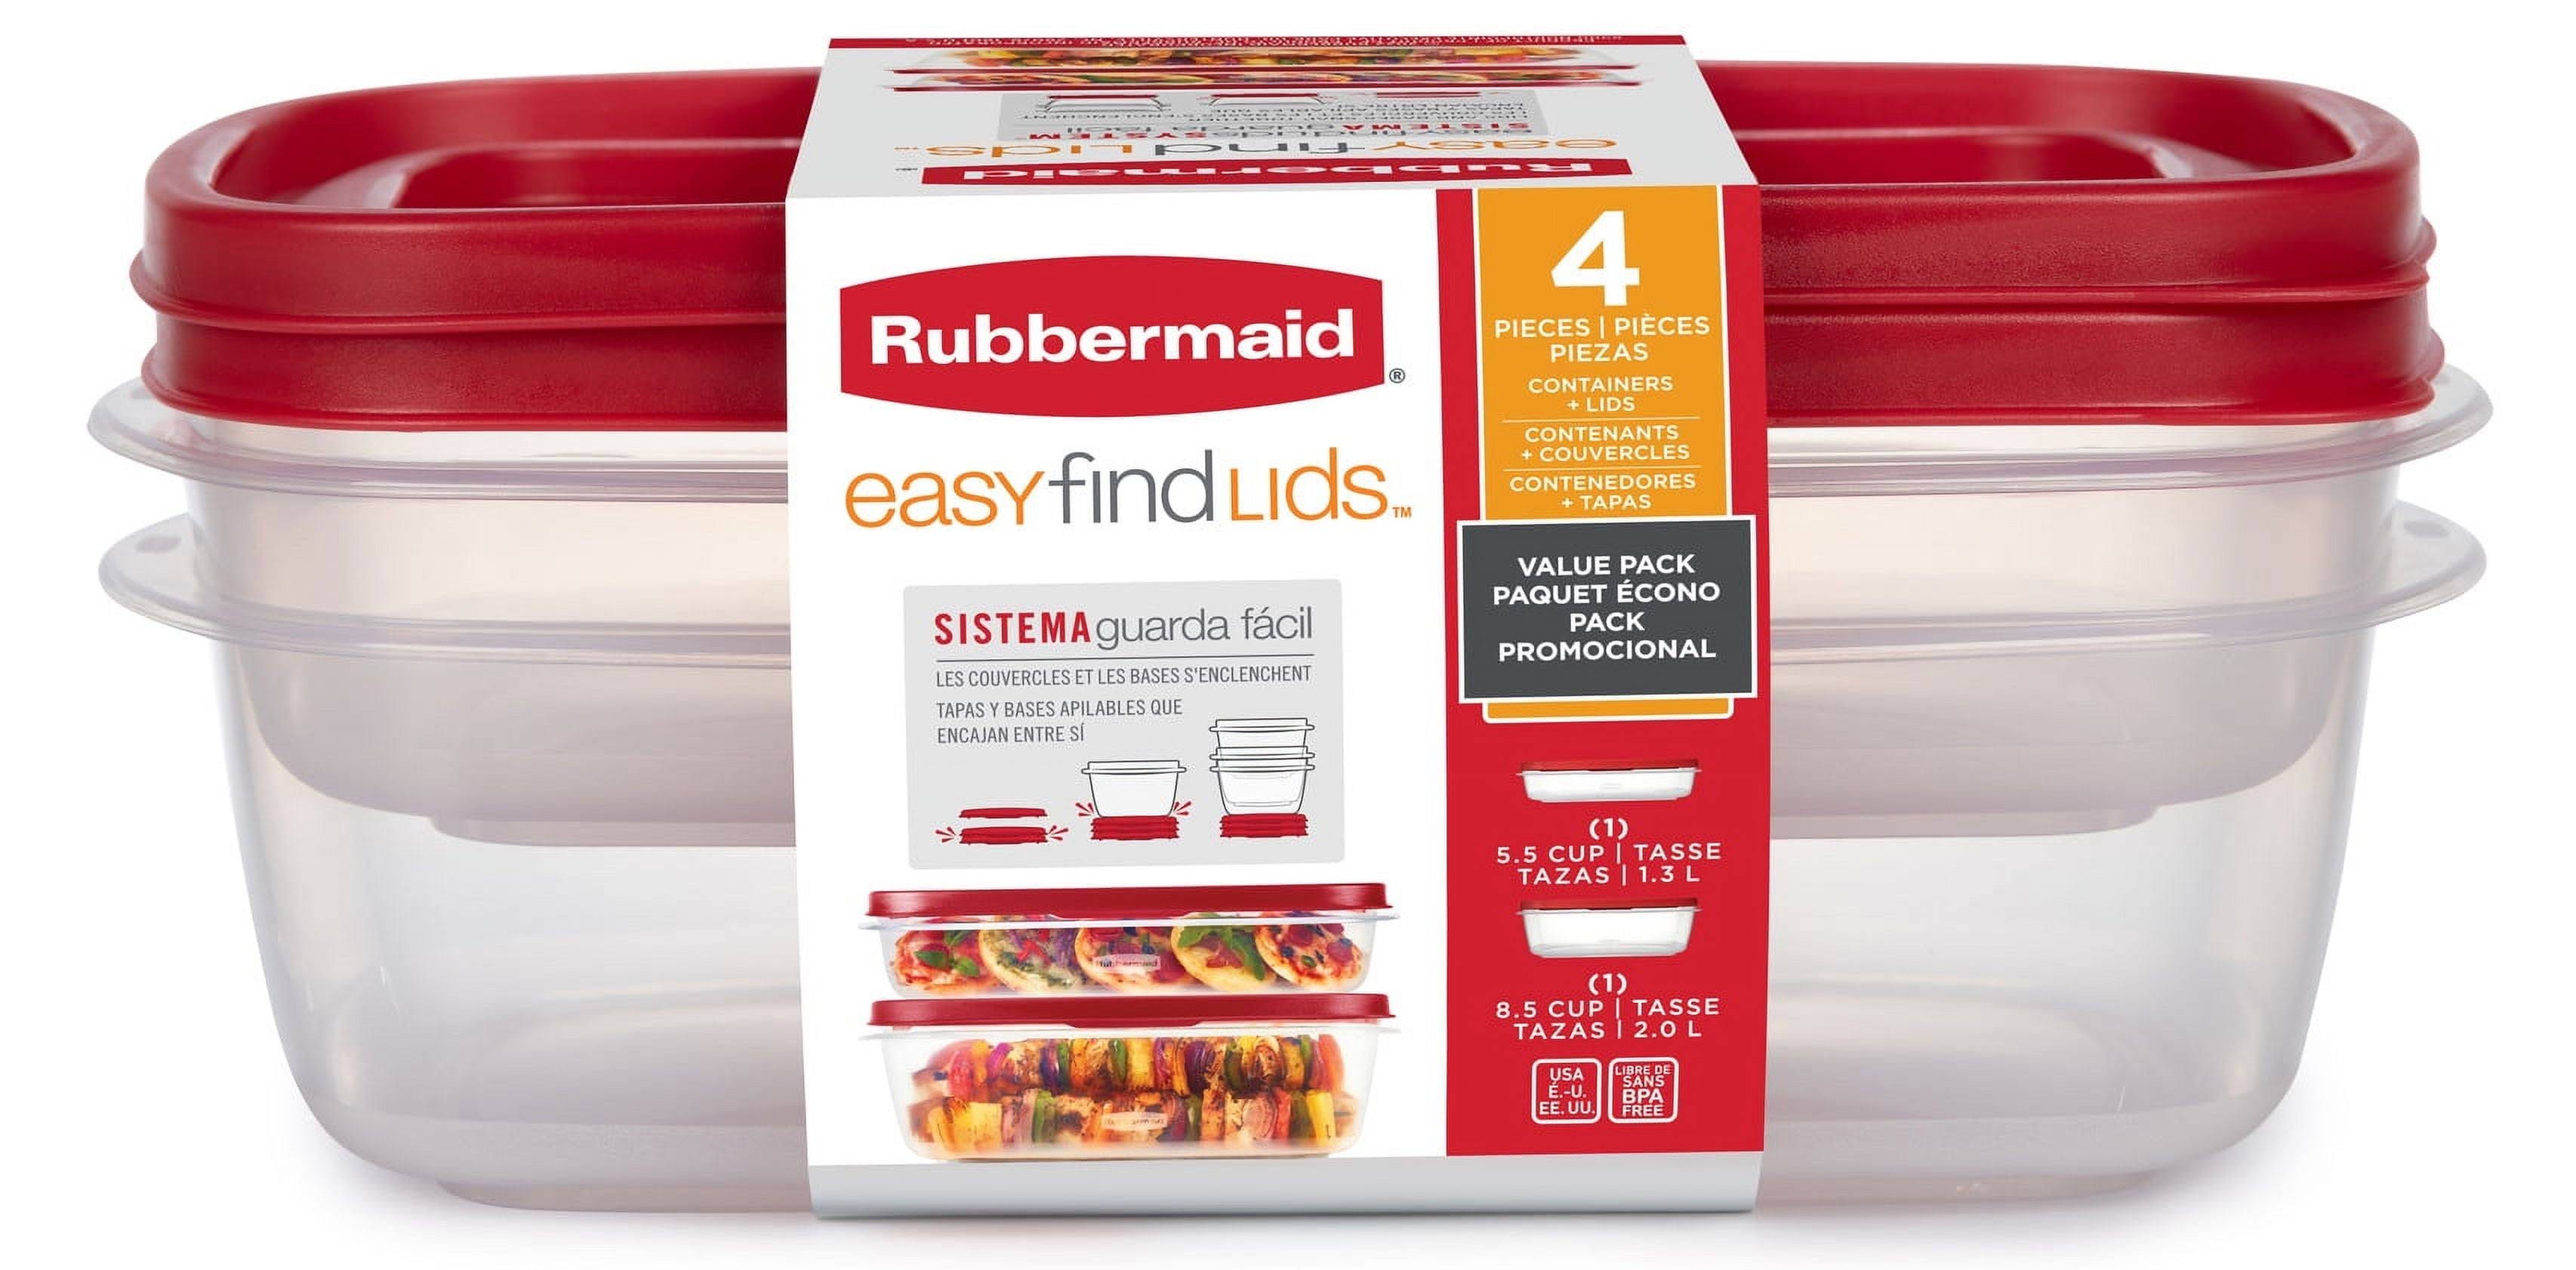 Rubbermaid Easy Find Lids Containers - Value Pack | Image